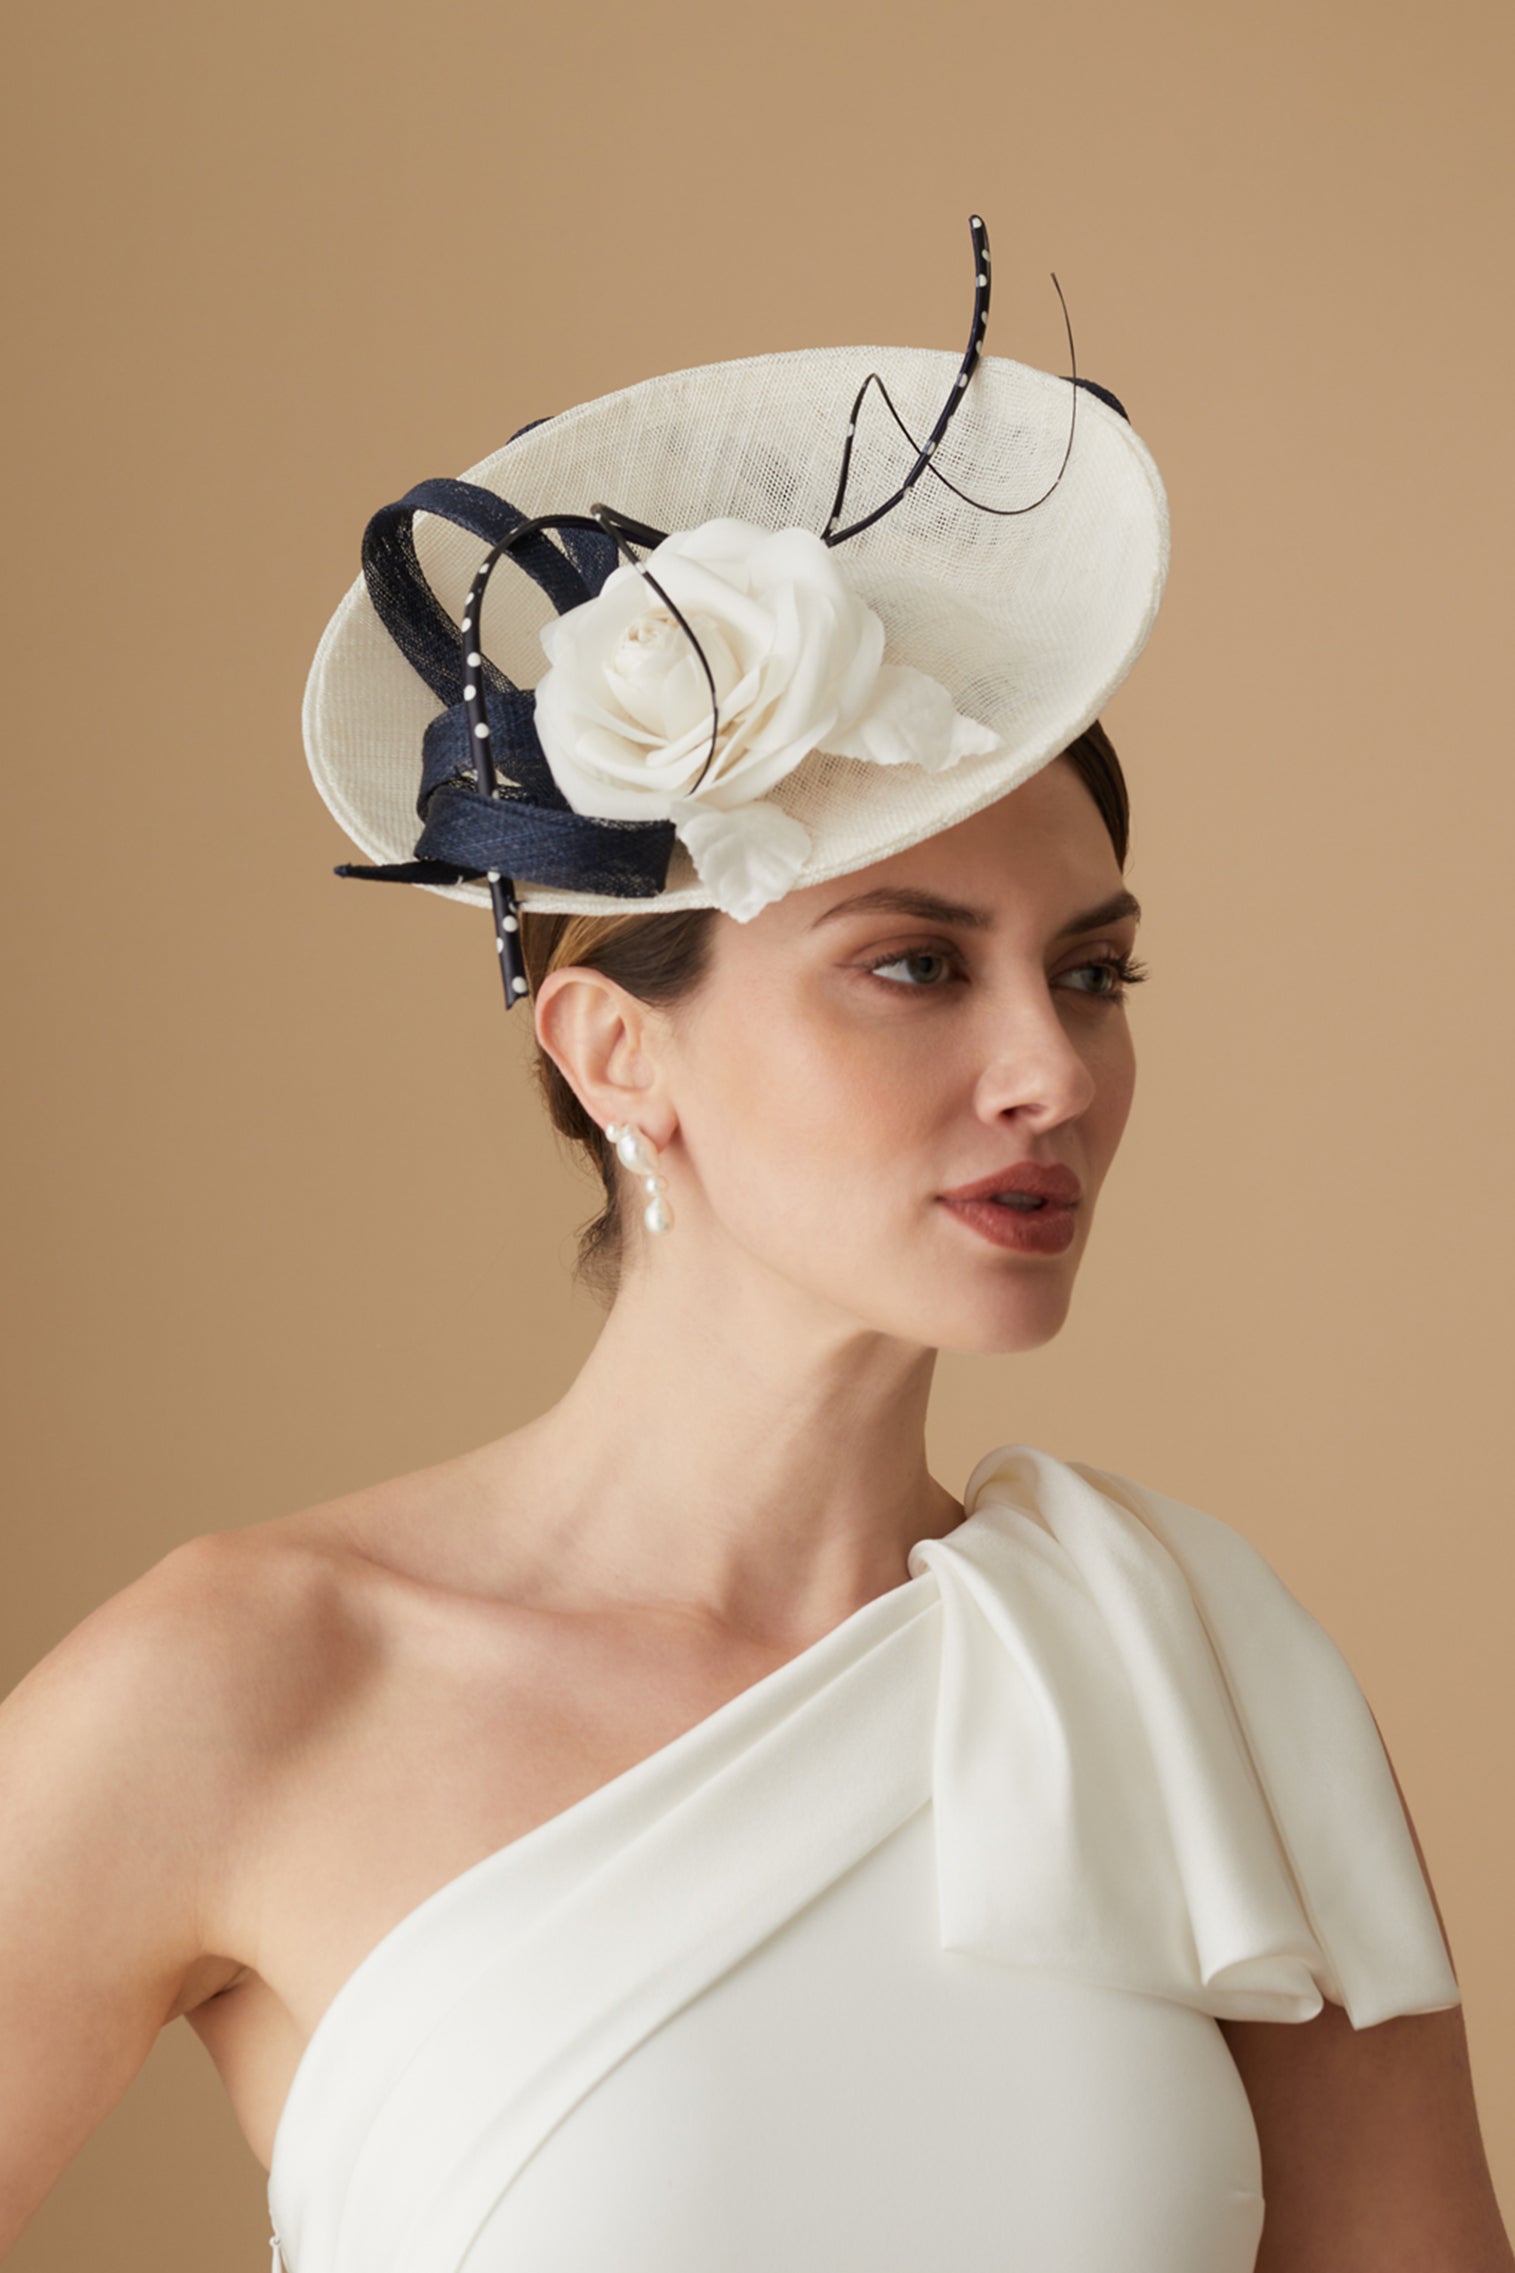 Assam White and Navy Saucer Hat - Grand National Hats - Lock & Co. Hatters London UK